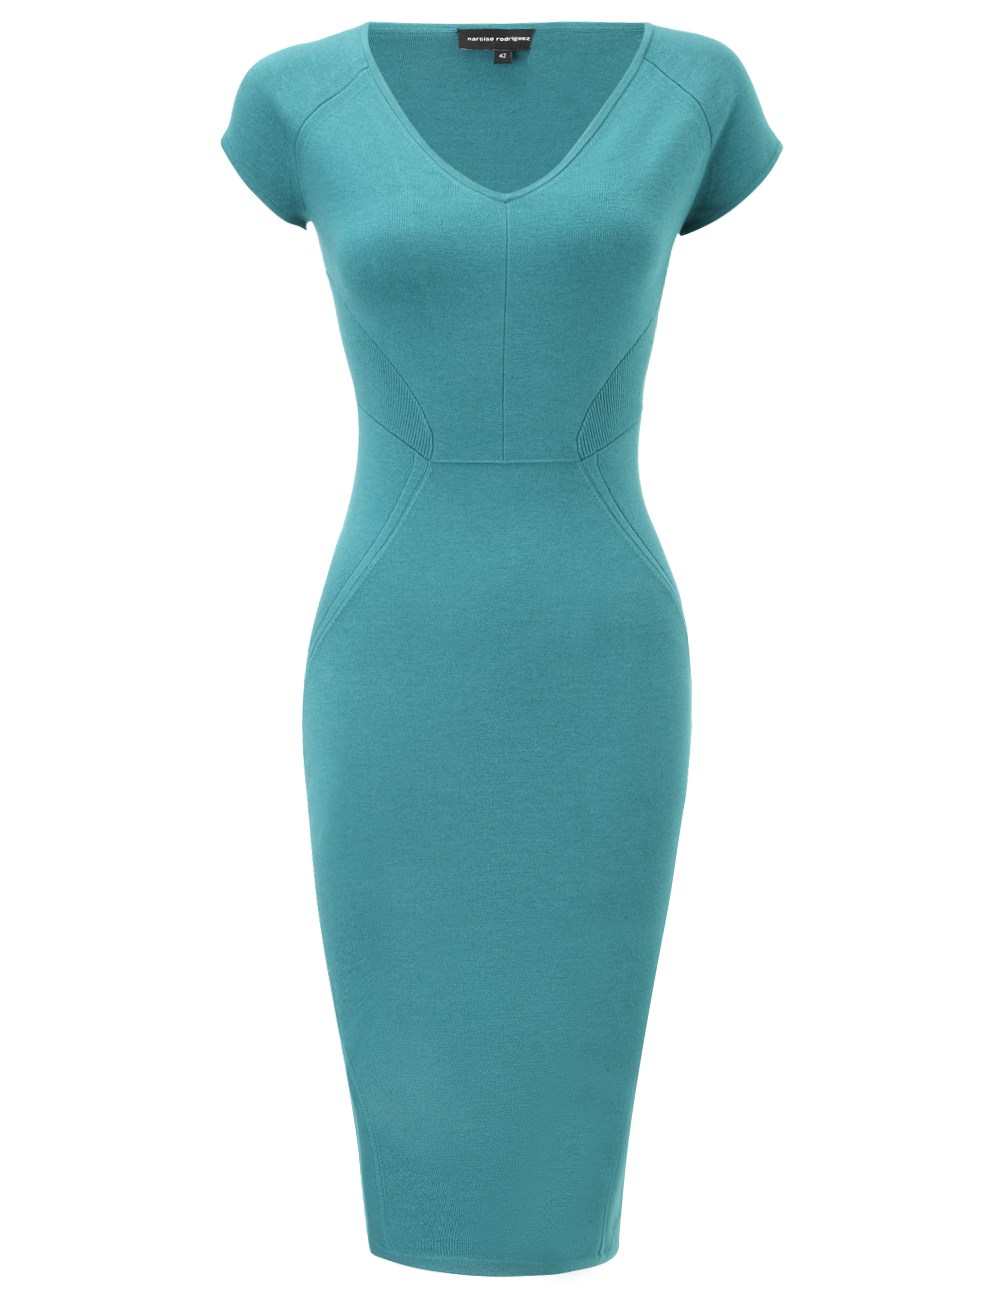 Narciso Rodriguez Silk Jersey Bodycon Dress in Blue (turquoise) | Lyst